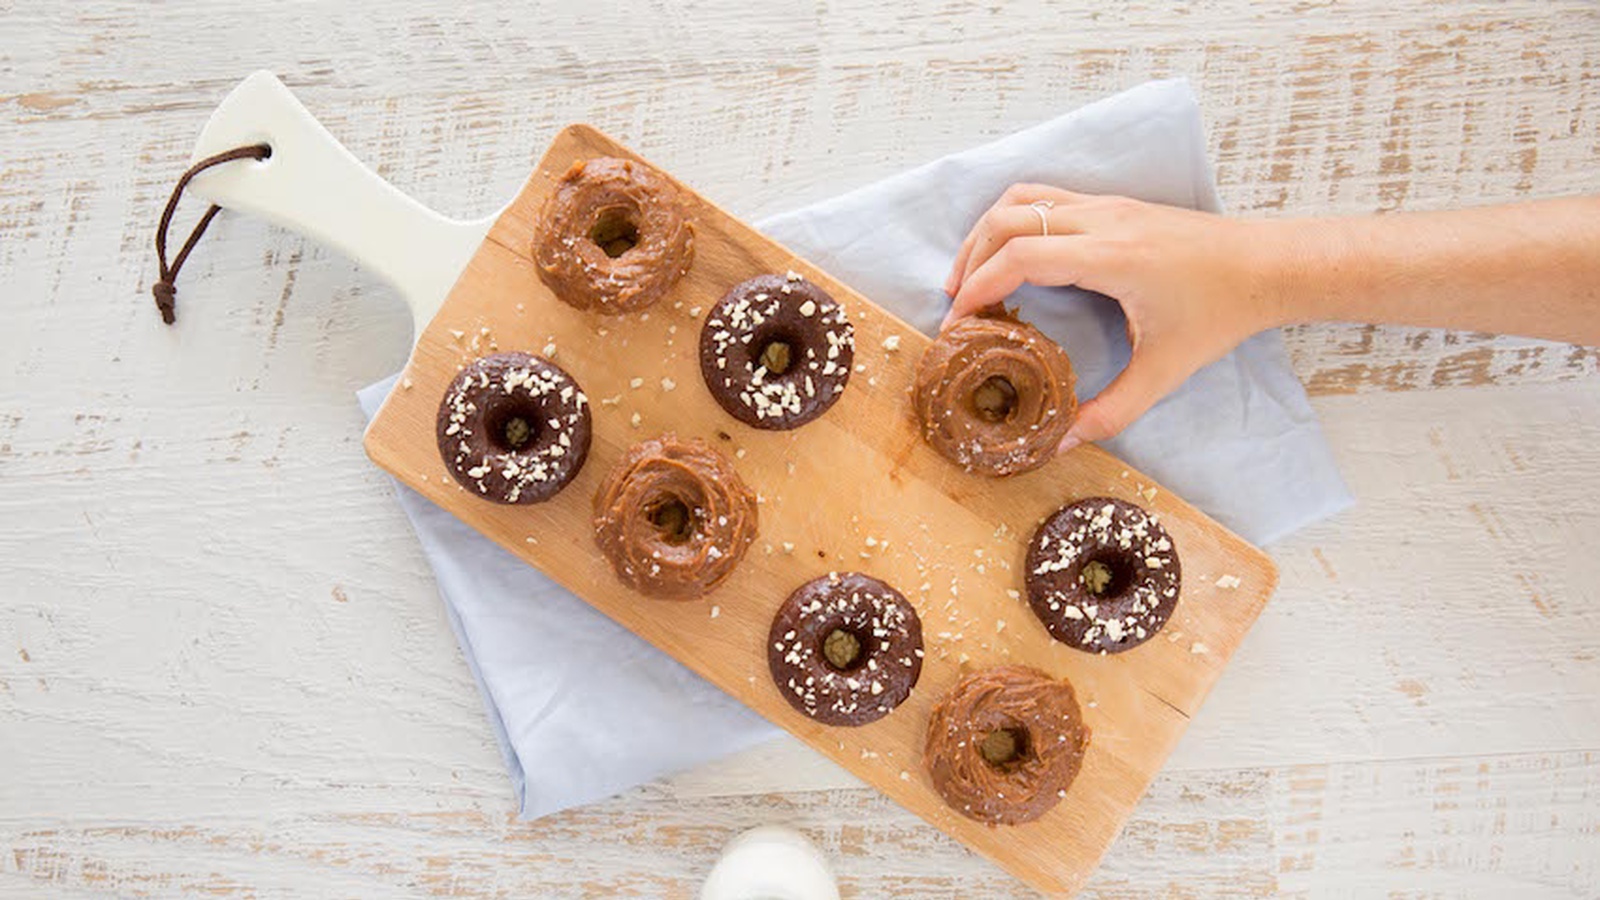 Gluten-Free Baked Donuts With Caramel & Chocolate Glaze